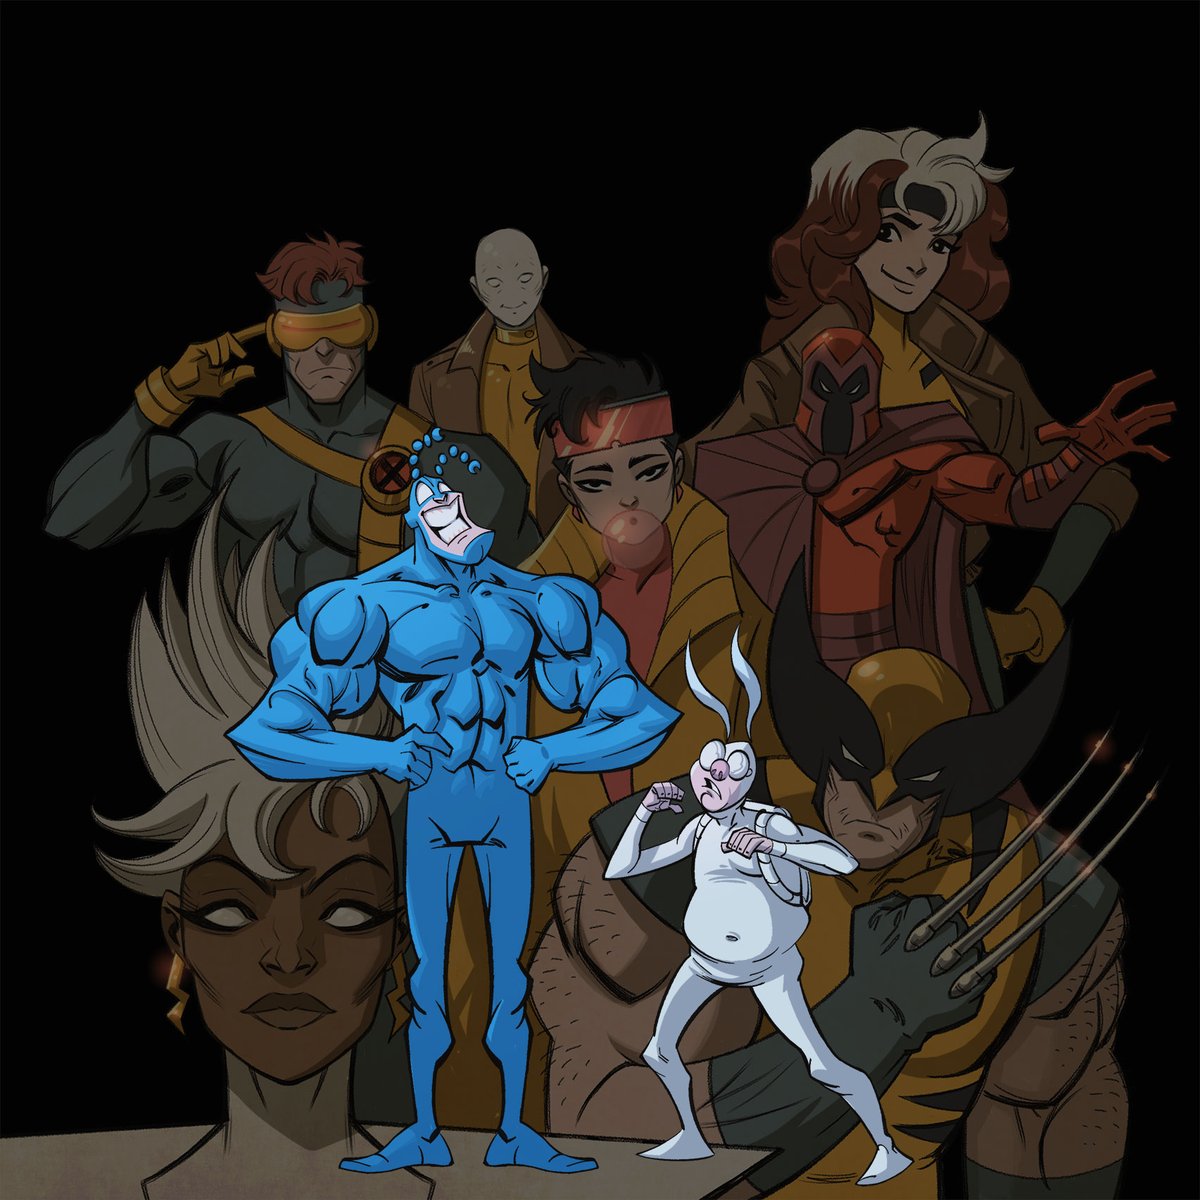 A bit of a Fox saturday morning cartoon throwback for The Line this week! I got to do all my favorites. #saturdaymorningcartoons #90skid #thetick #xmen #spoon #xmen97